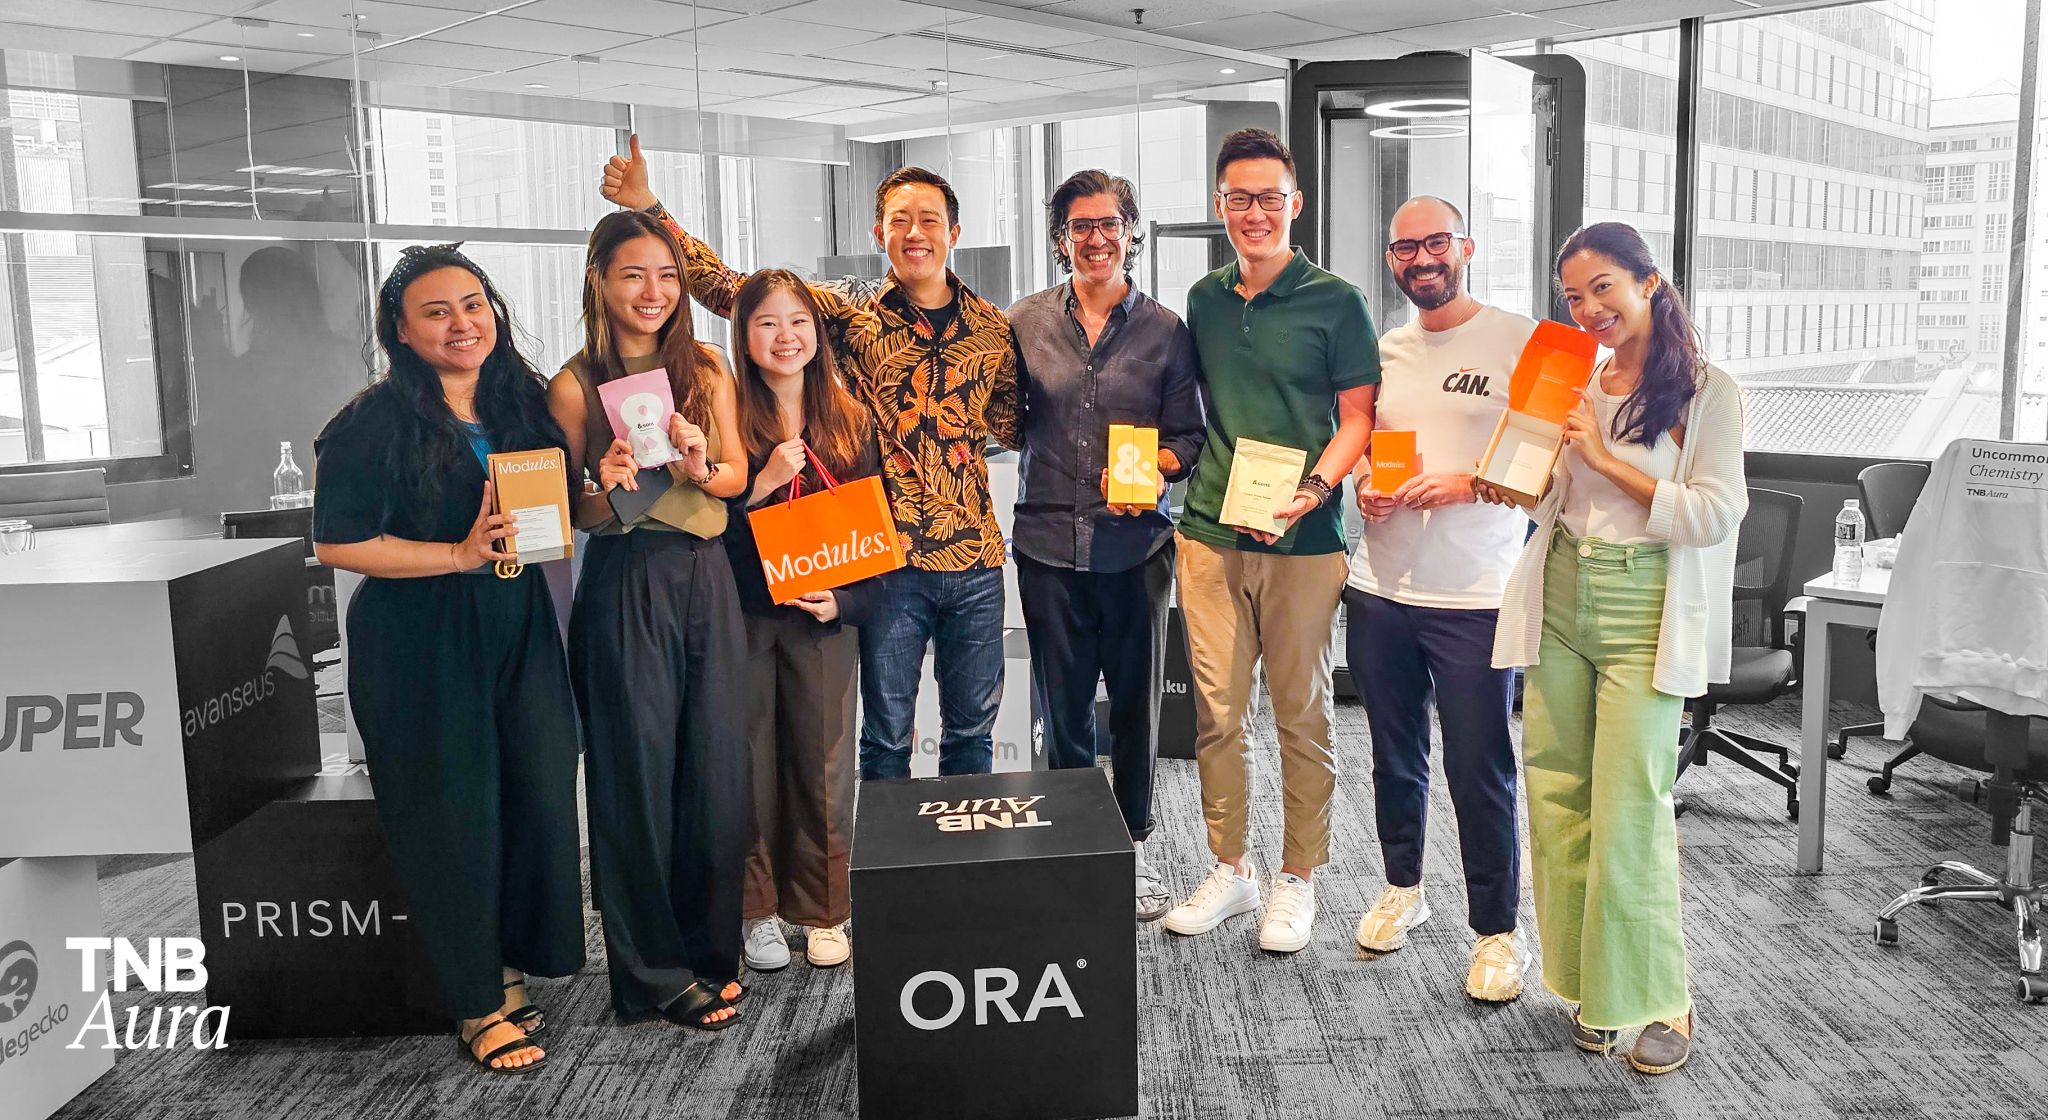 The TNB Aura team standing together holding materials from their new portfolio company ORA